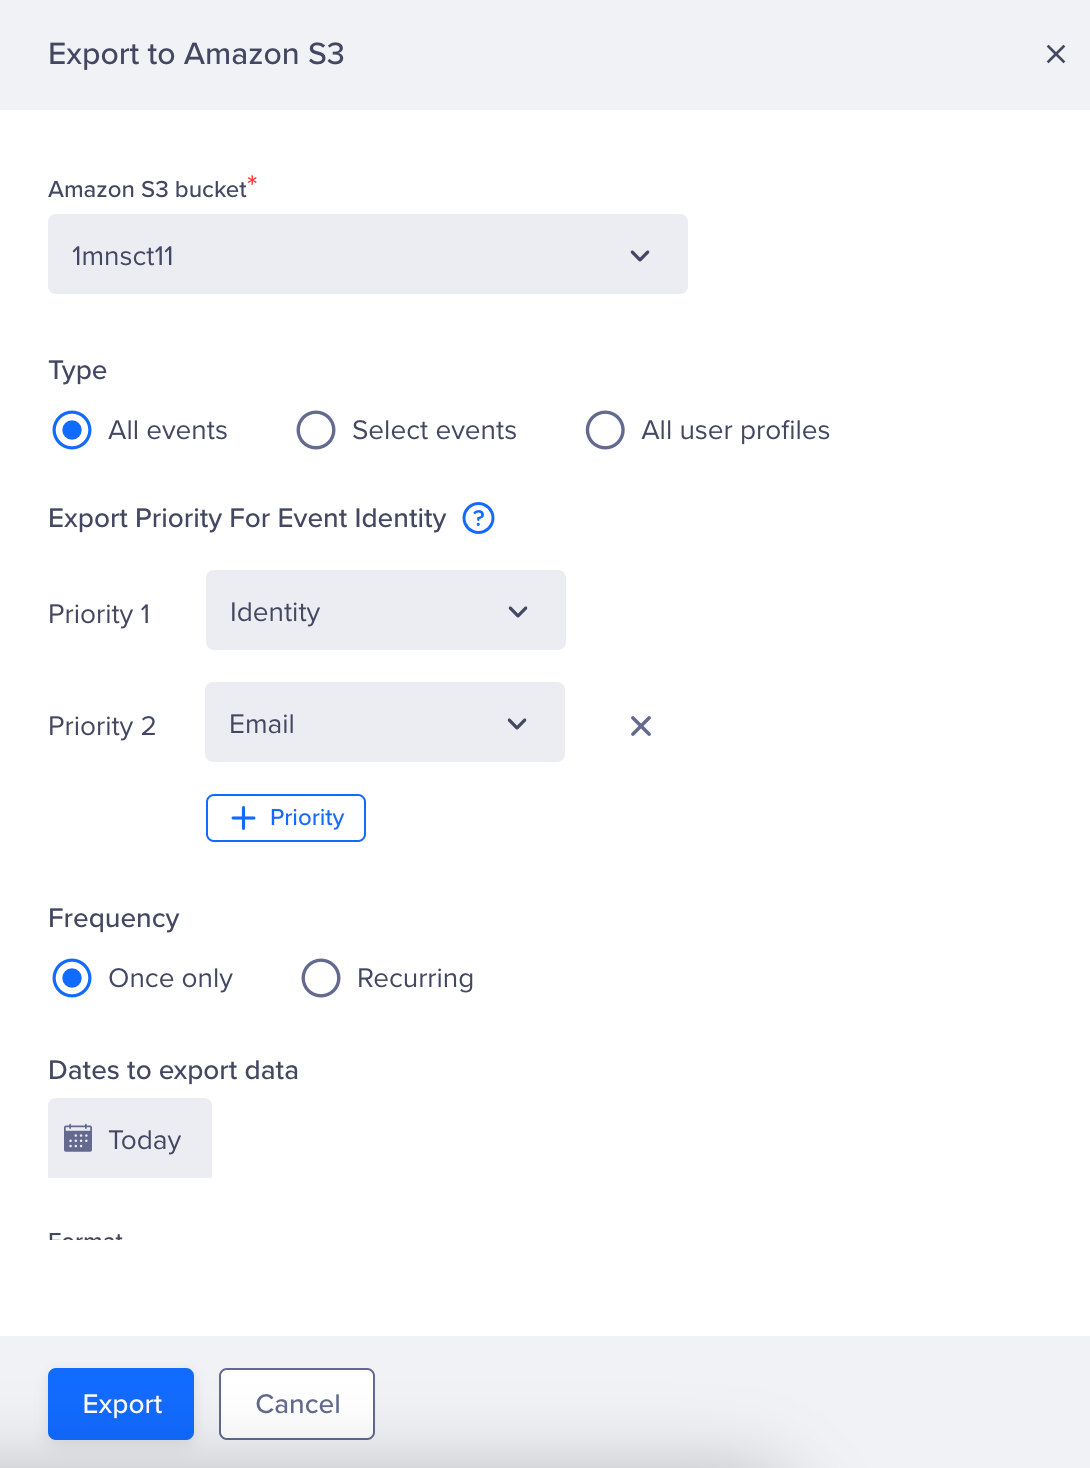 Prioritize User Identities for Exports